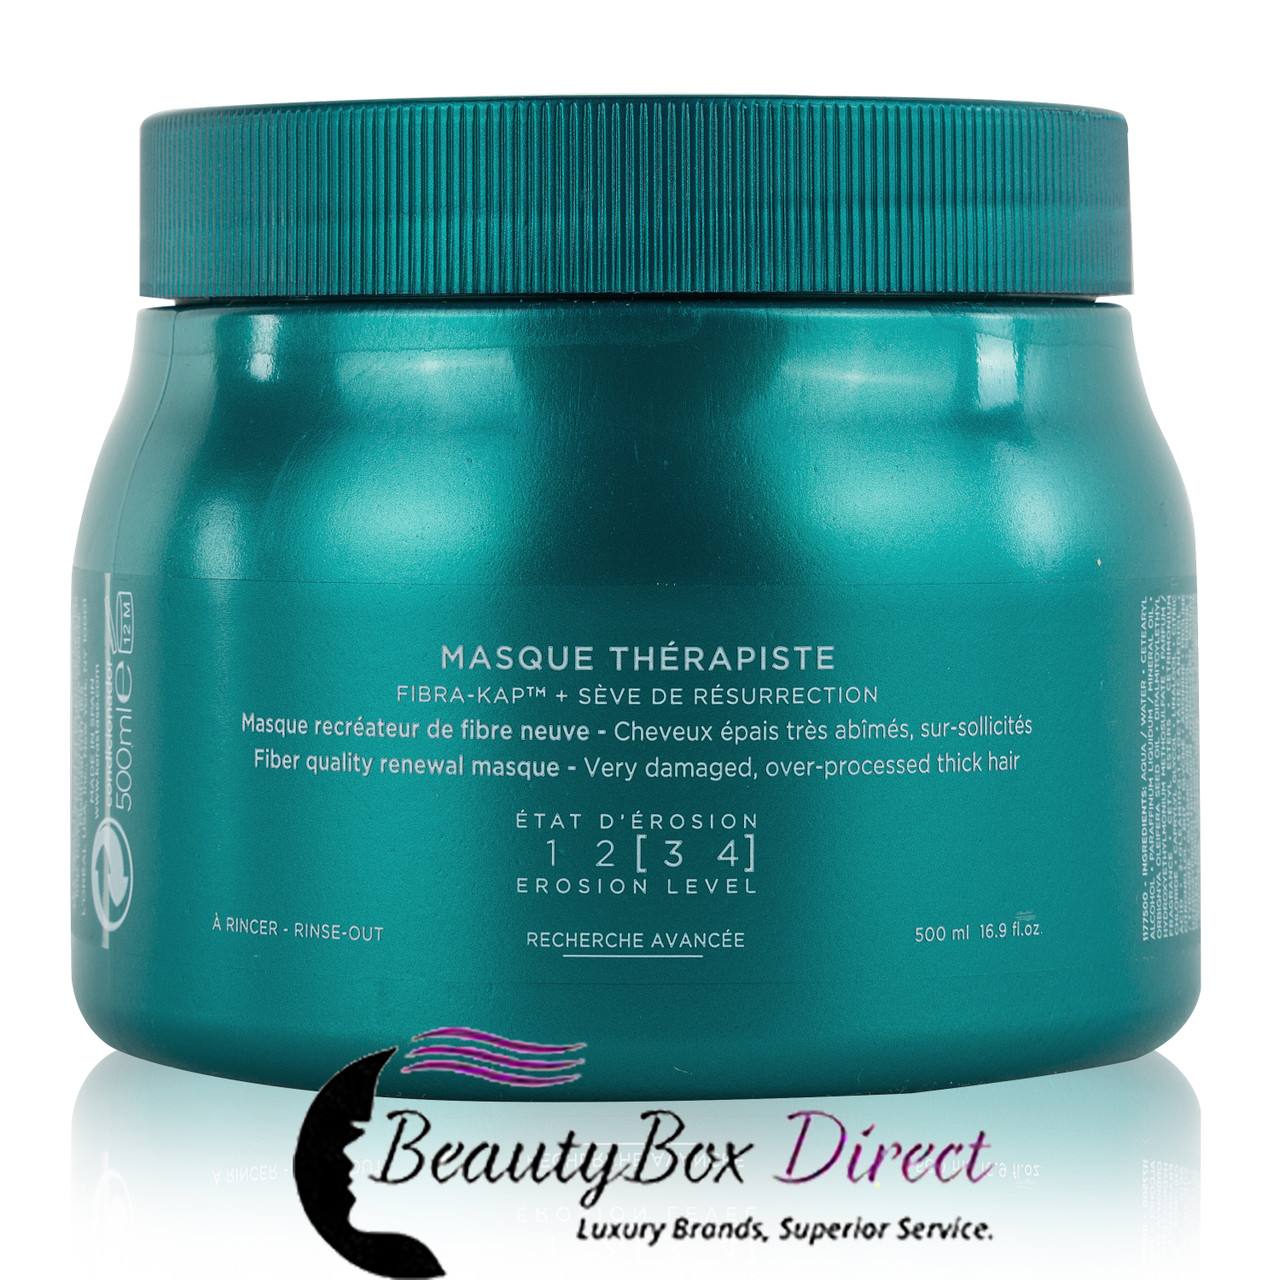 Resistance Masque Therapiste 16.9 oz. - BeautyBox Direct